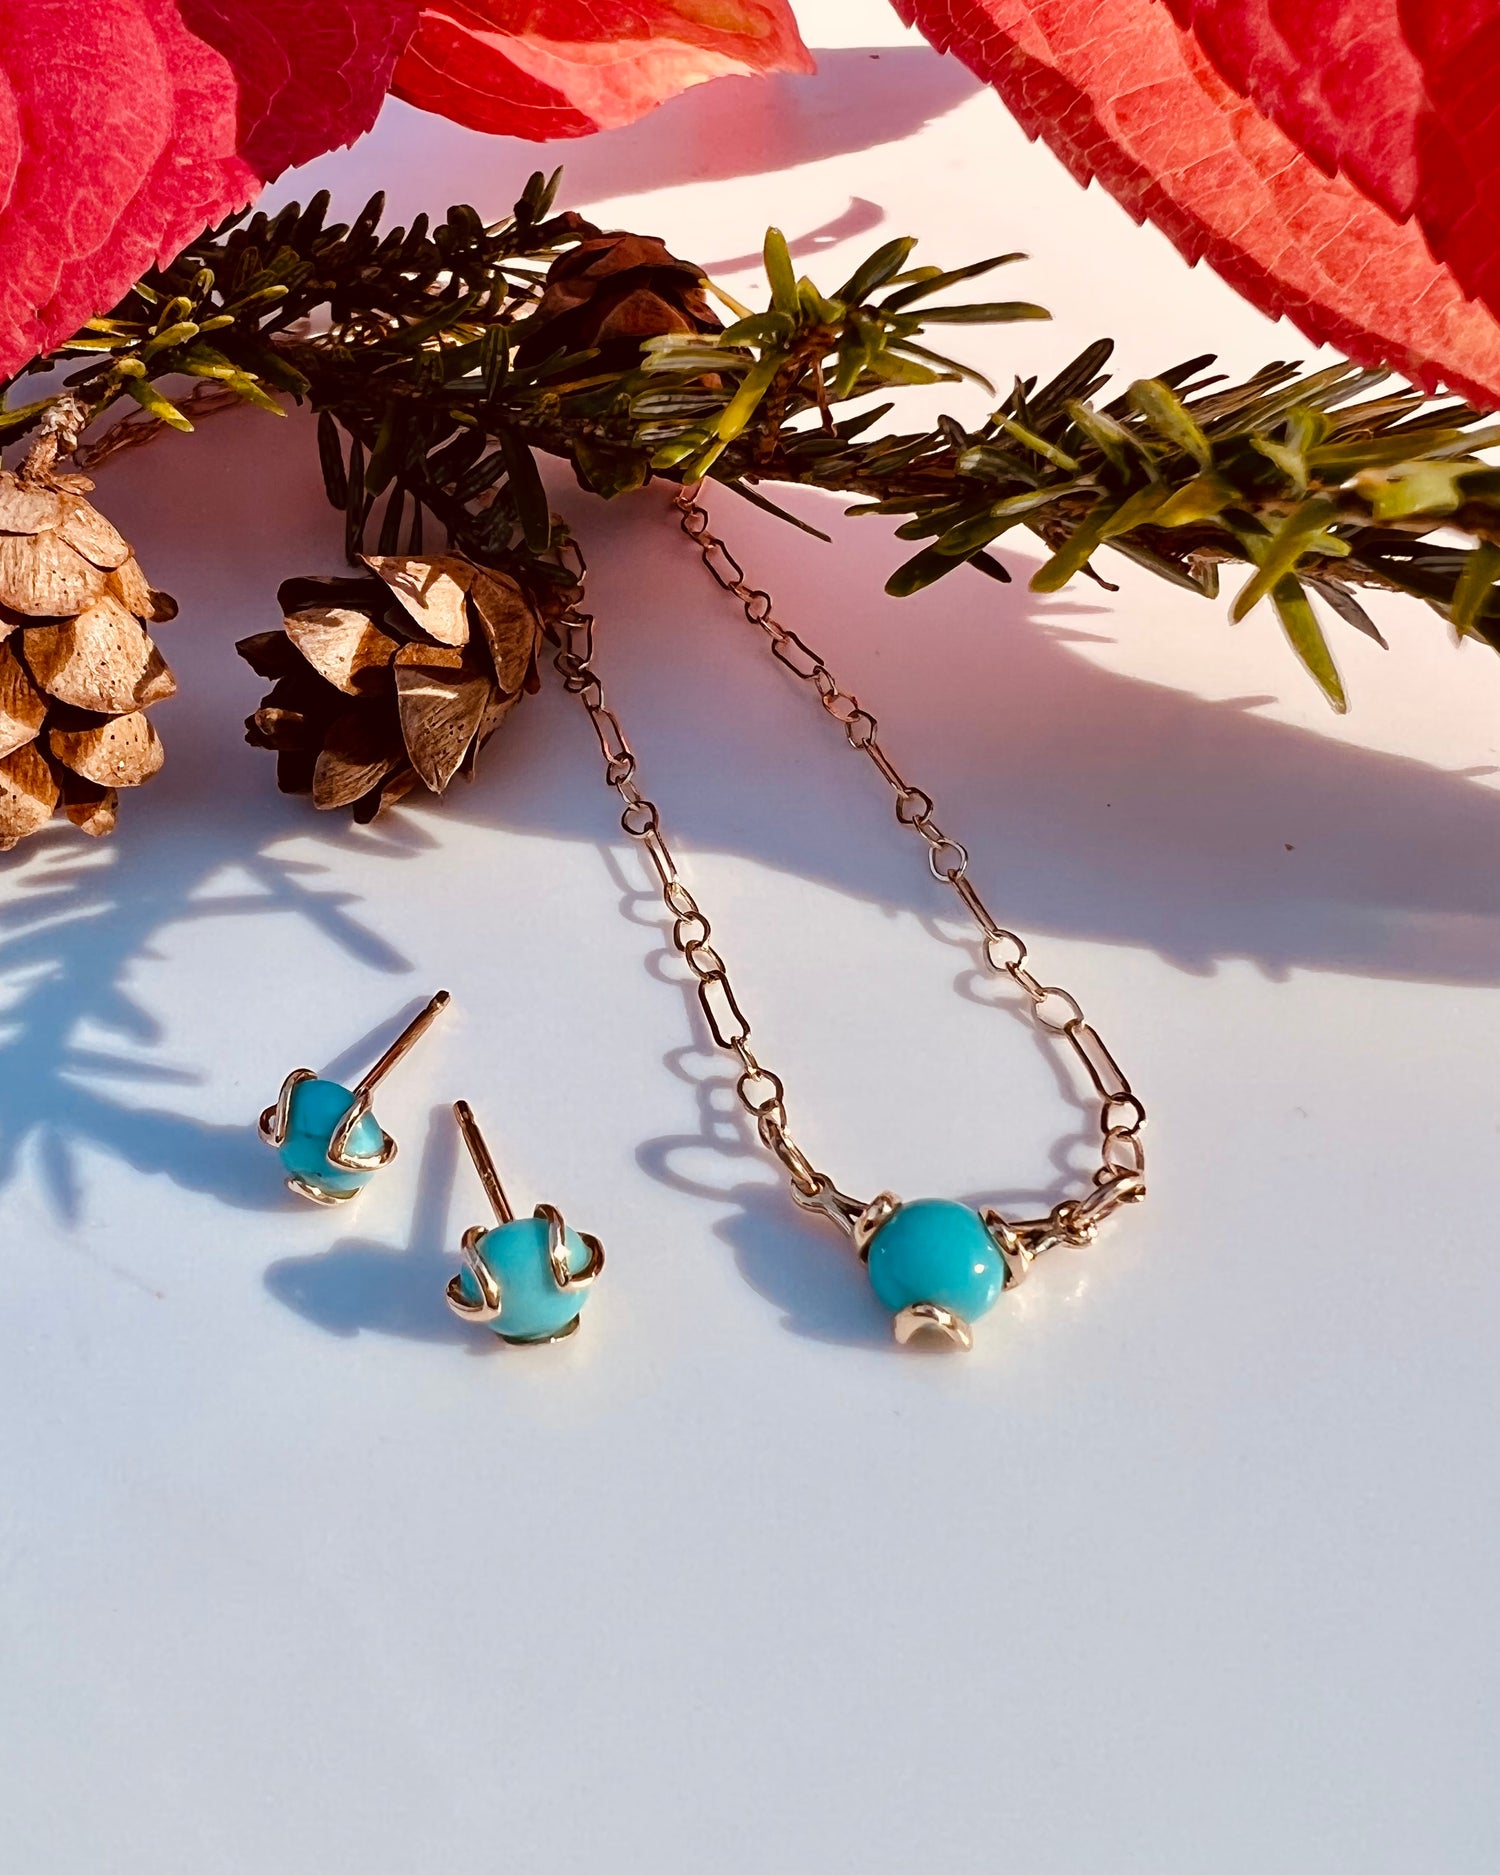 Turquoise Fiore Necklace shown with Earrings in 14k gold by Hannah Daye & Co